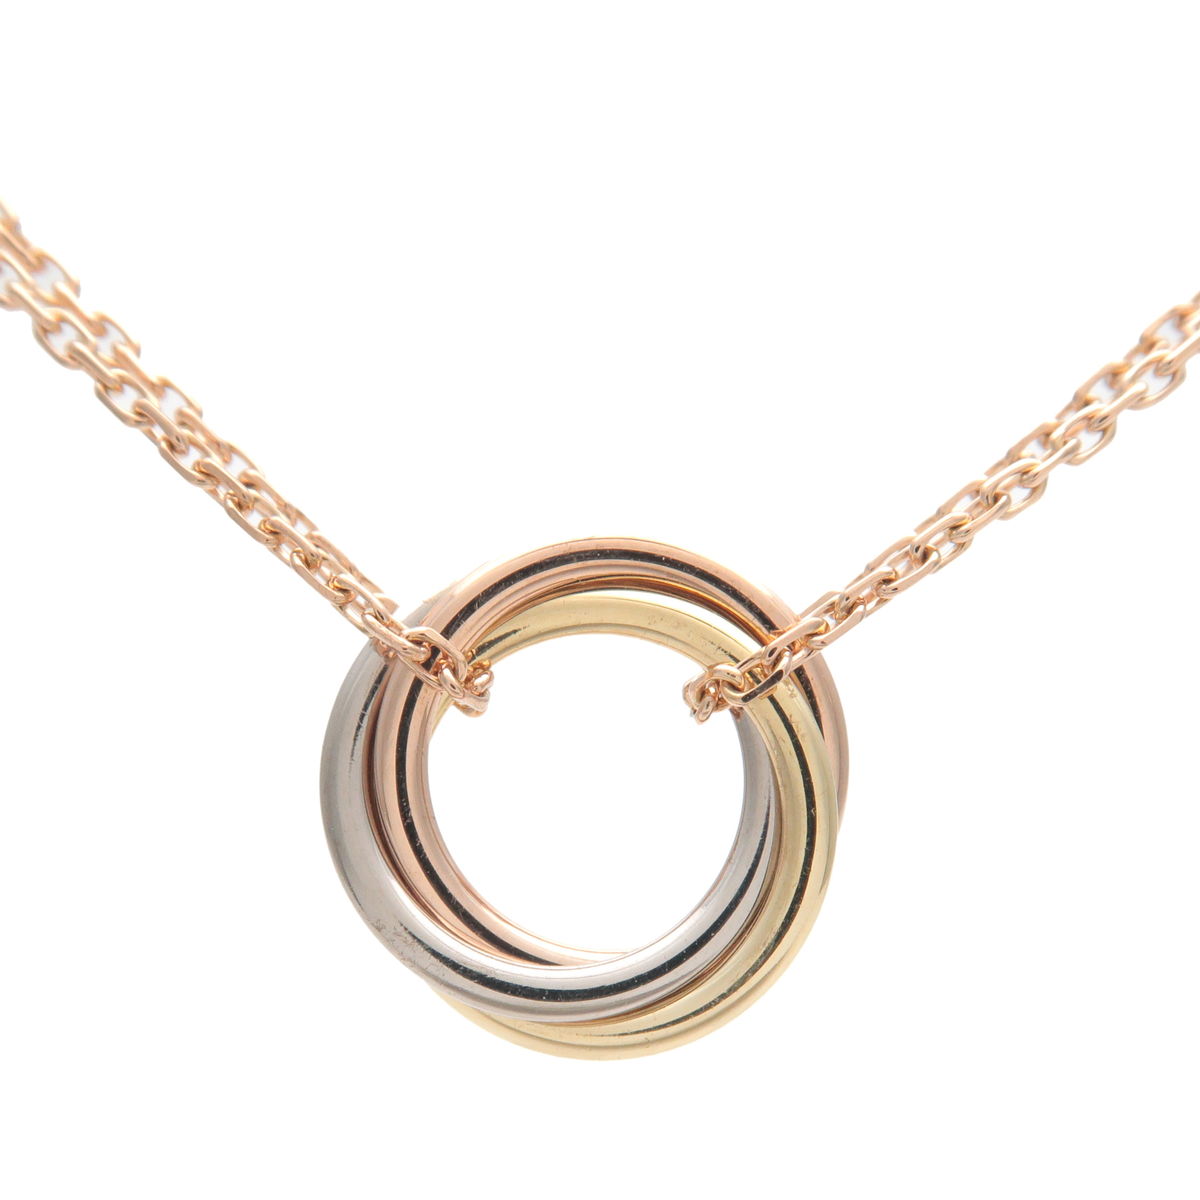 Cartier-Sweet-Trinity-Necklace-K18-750-Yellow/White/Rose-Gold